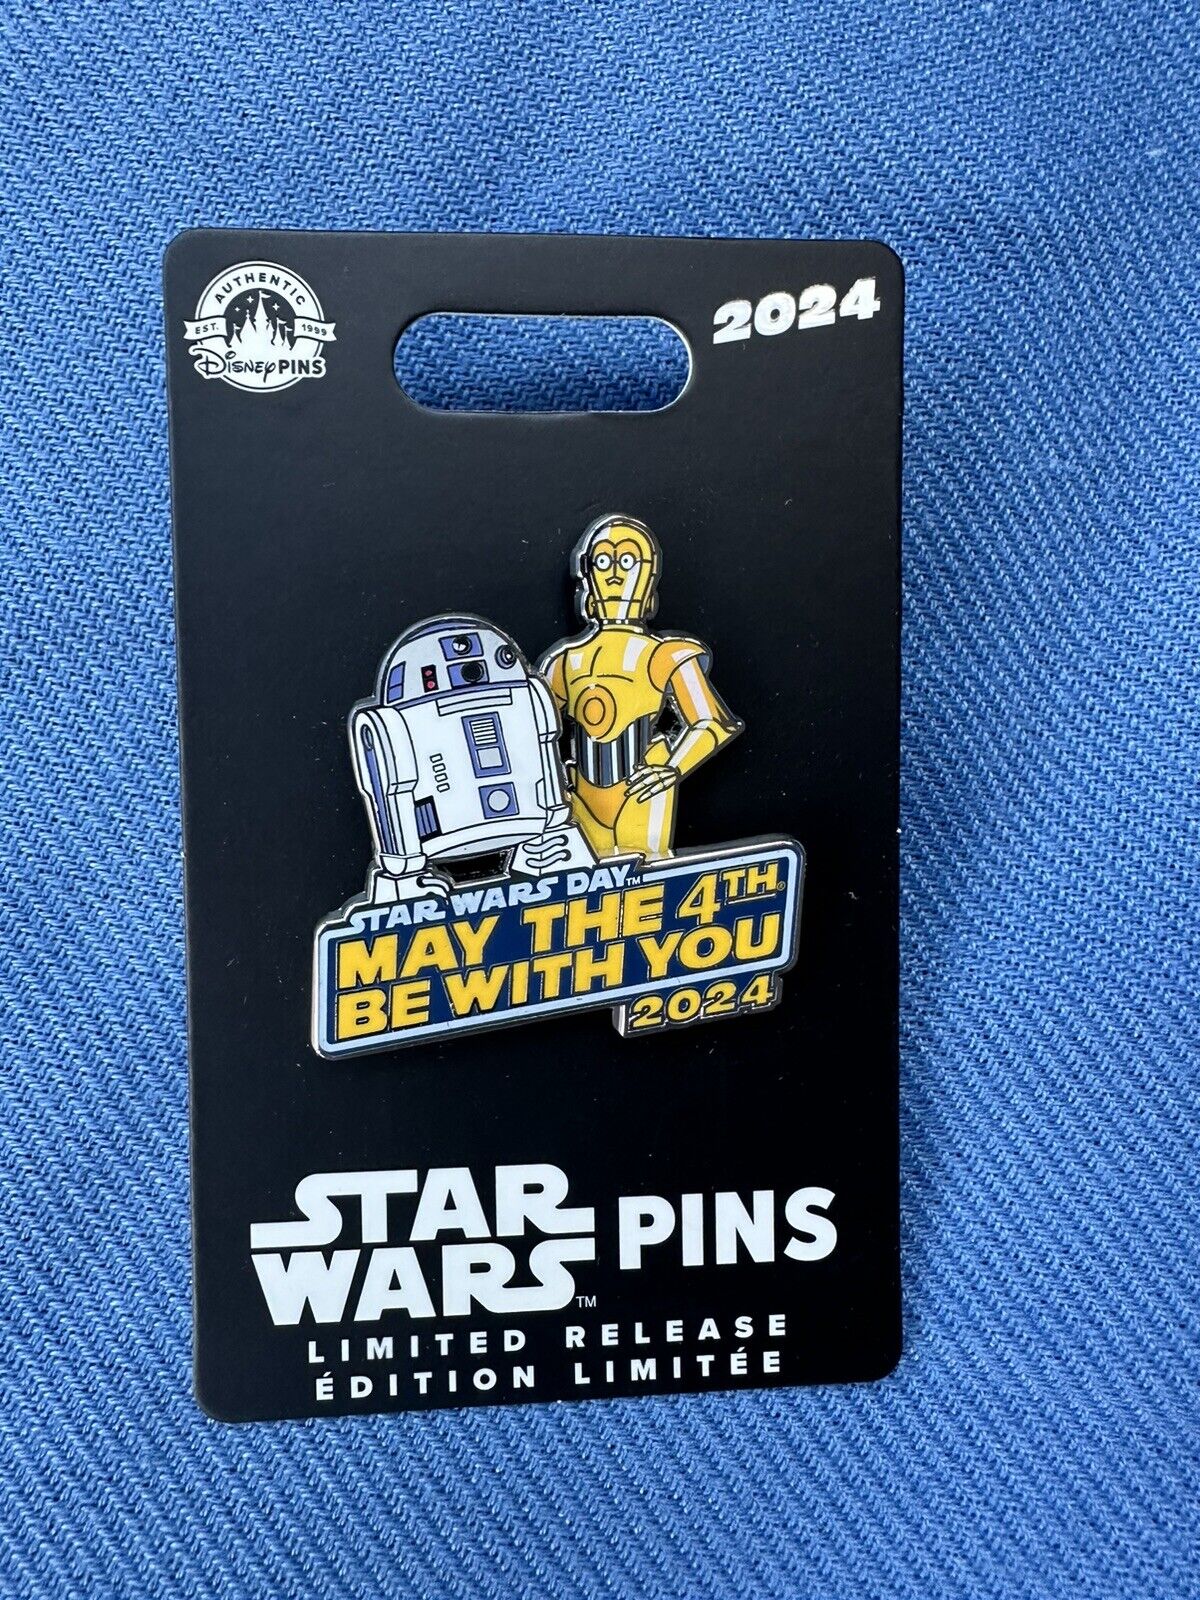 2024 Disney Park Star Wars R2-D2 C-3PO May 4th Be With You Droids Pin LR Limited